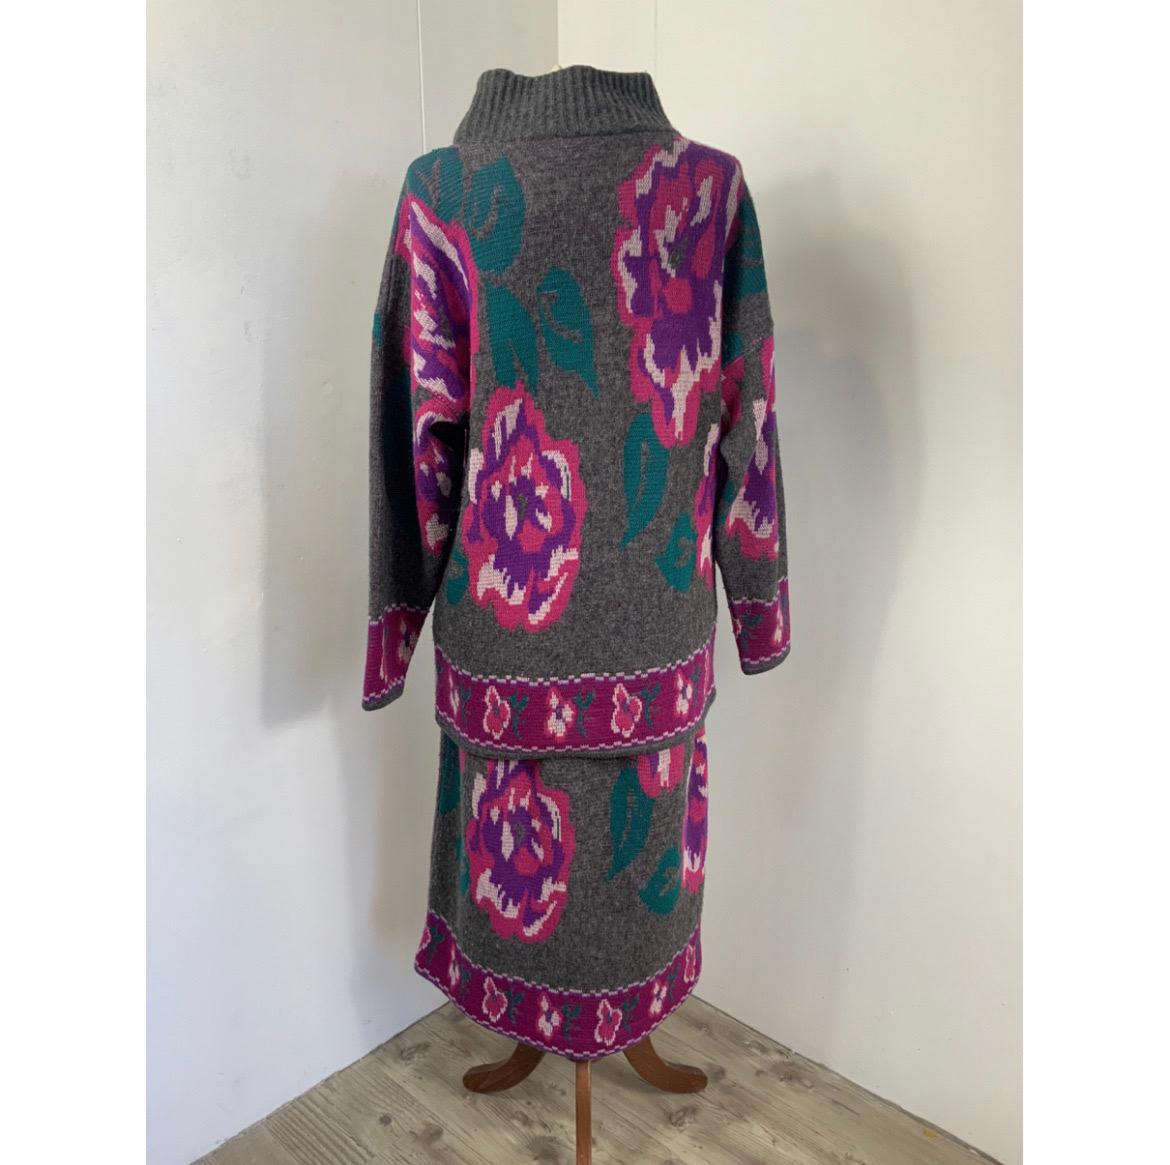 HomeBlumarineBlumarine ClothesBlumarine SuitsBlumarine Suit Wool
    	
Hello, my name is Vintage'65. Thank you for your interest in my product. How can I help you?

   

SUBMIT
250 characters left
Blumarine
Suit Wool
MSize Guide

GoodOur